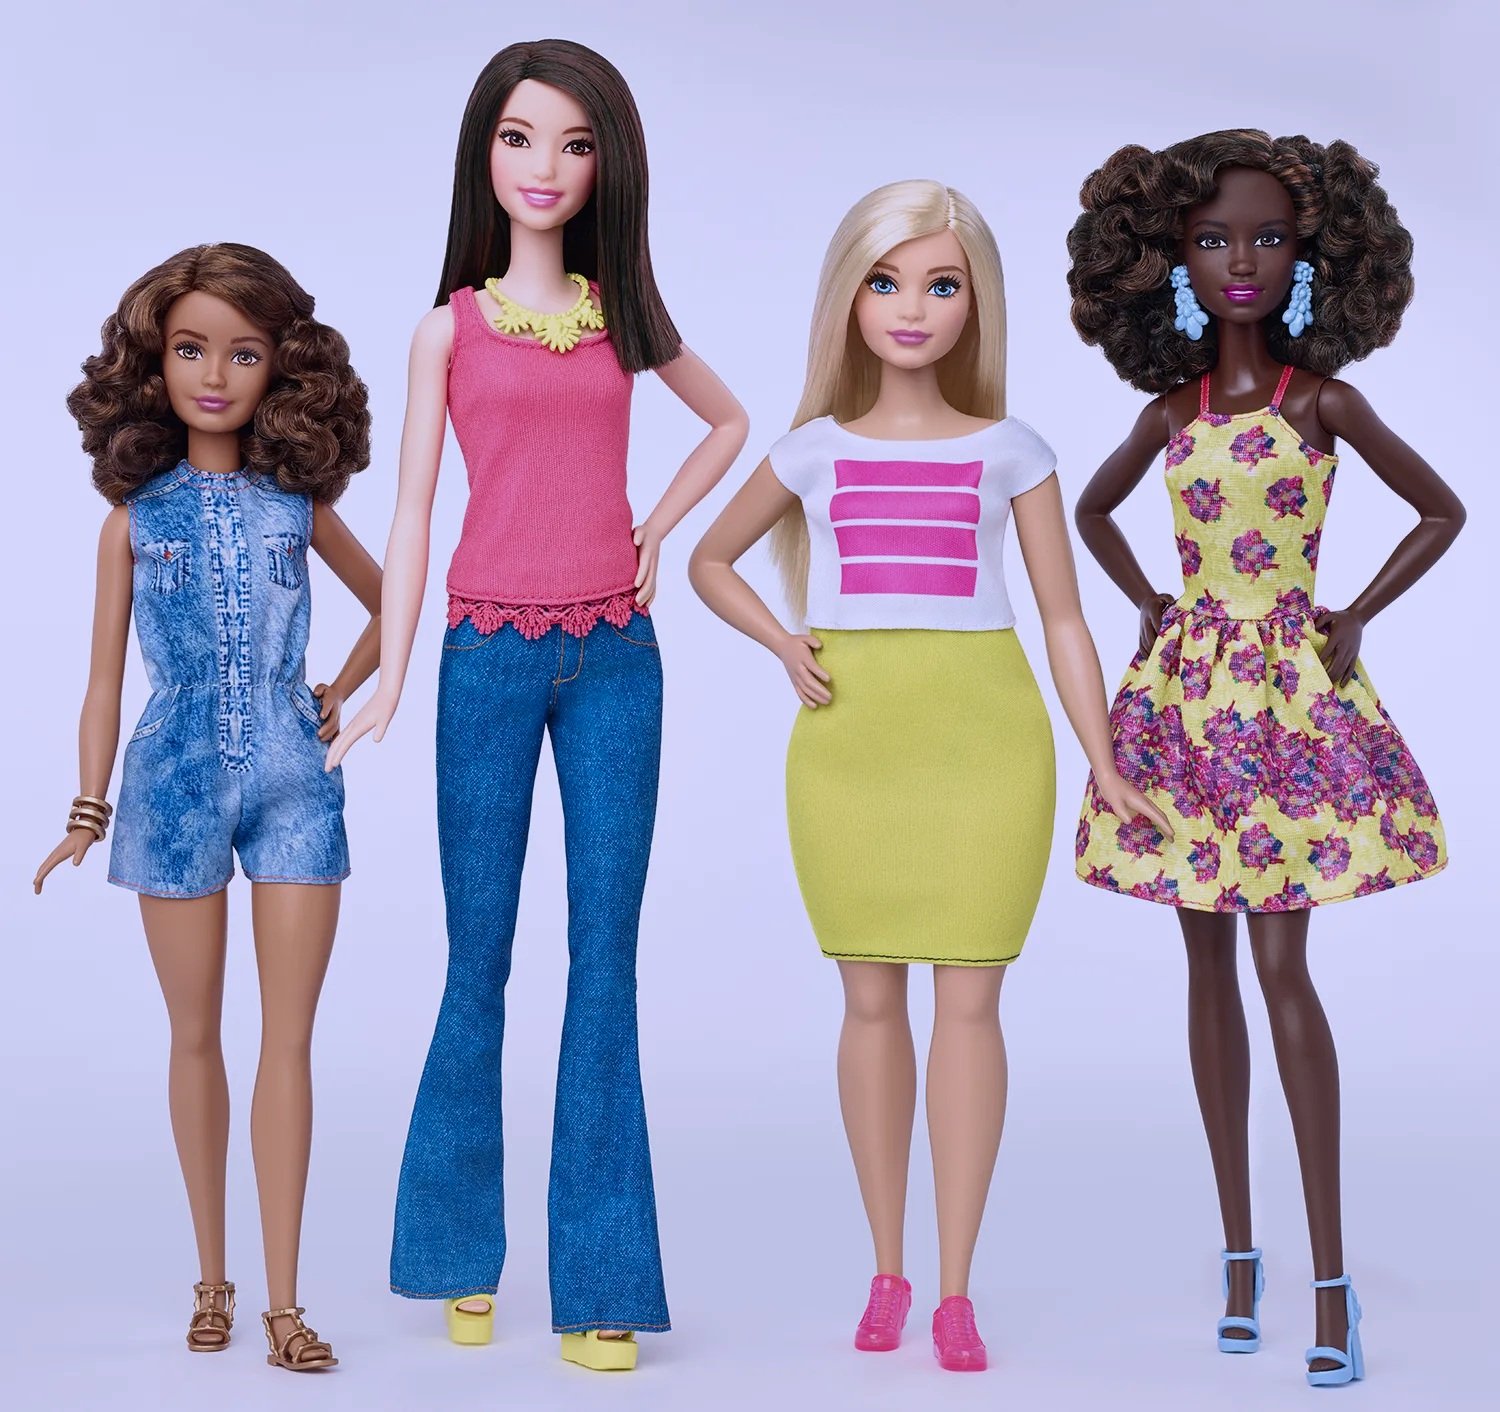 1453987553-barbie-2016fashionistascollection.jpg